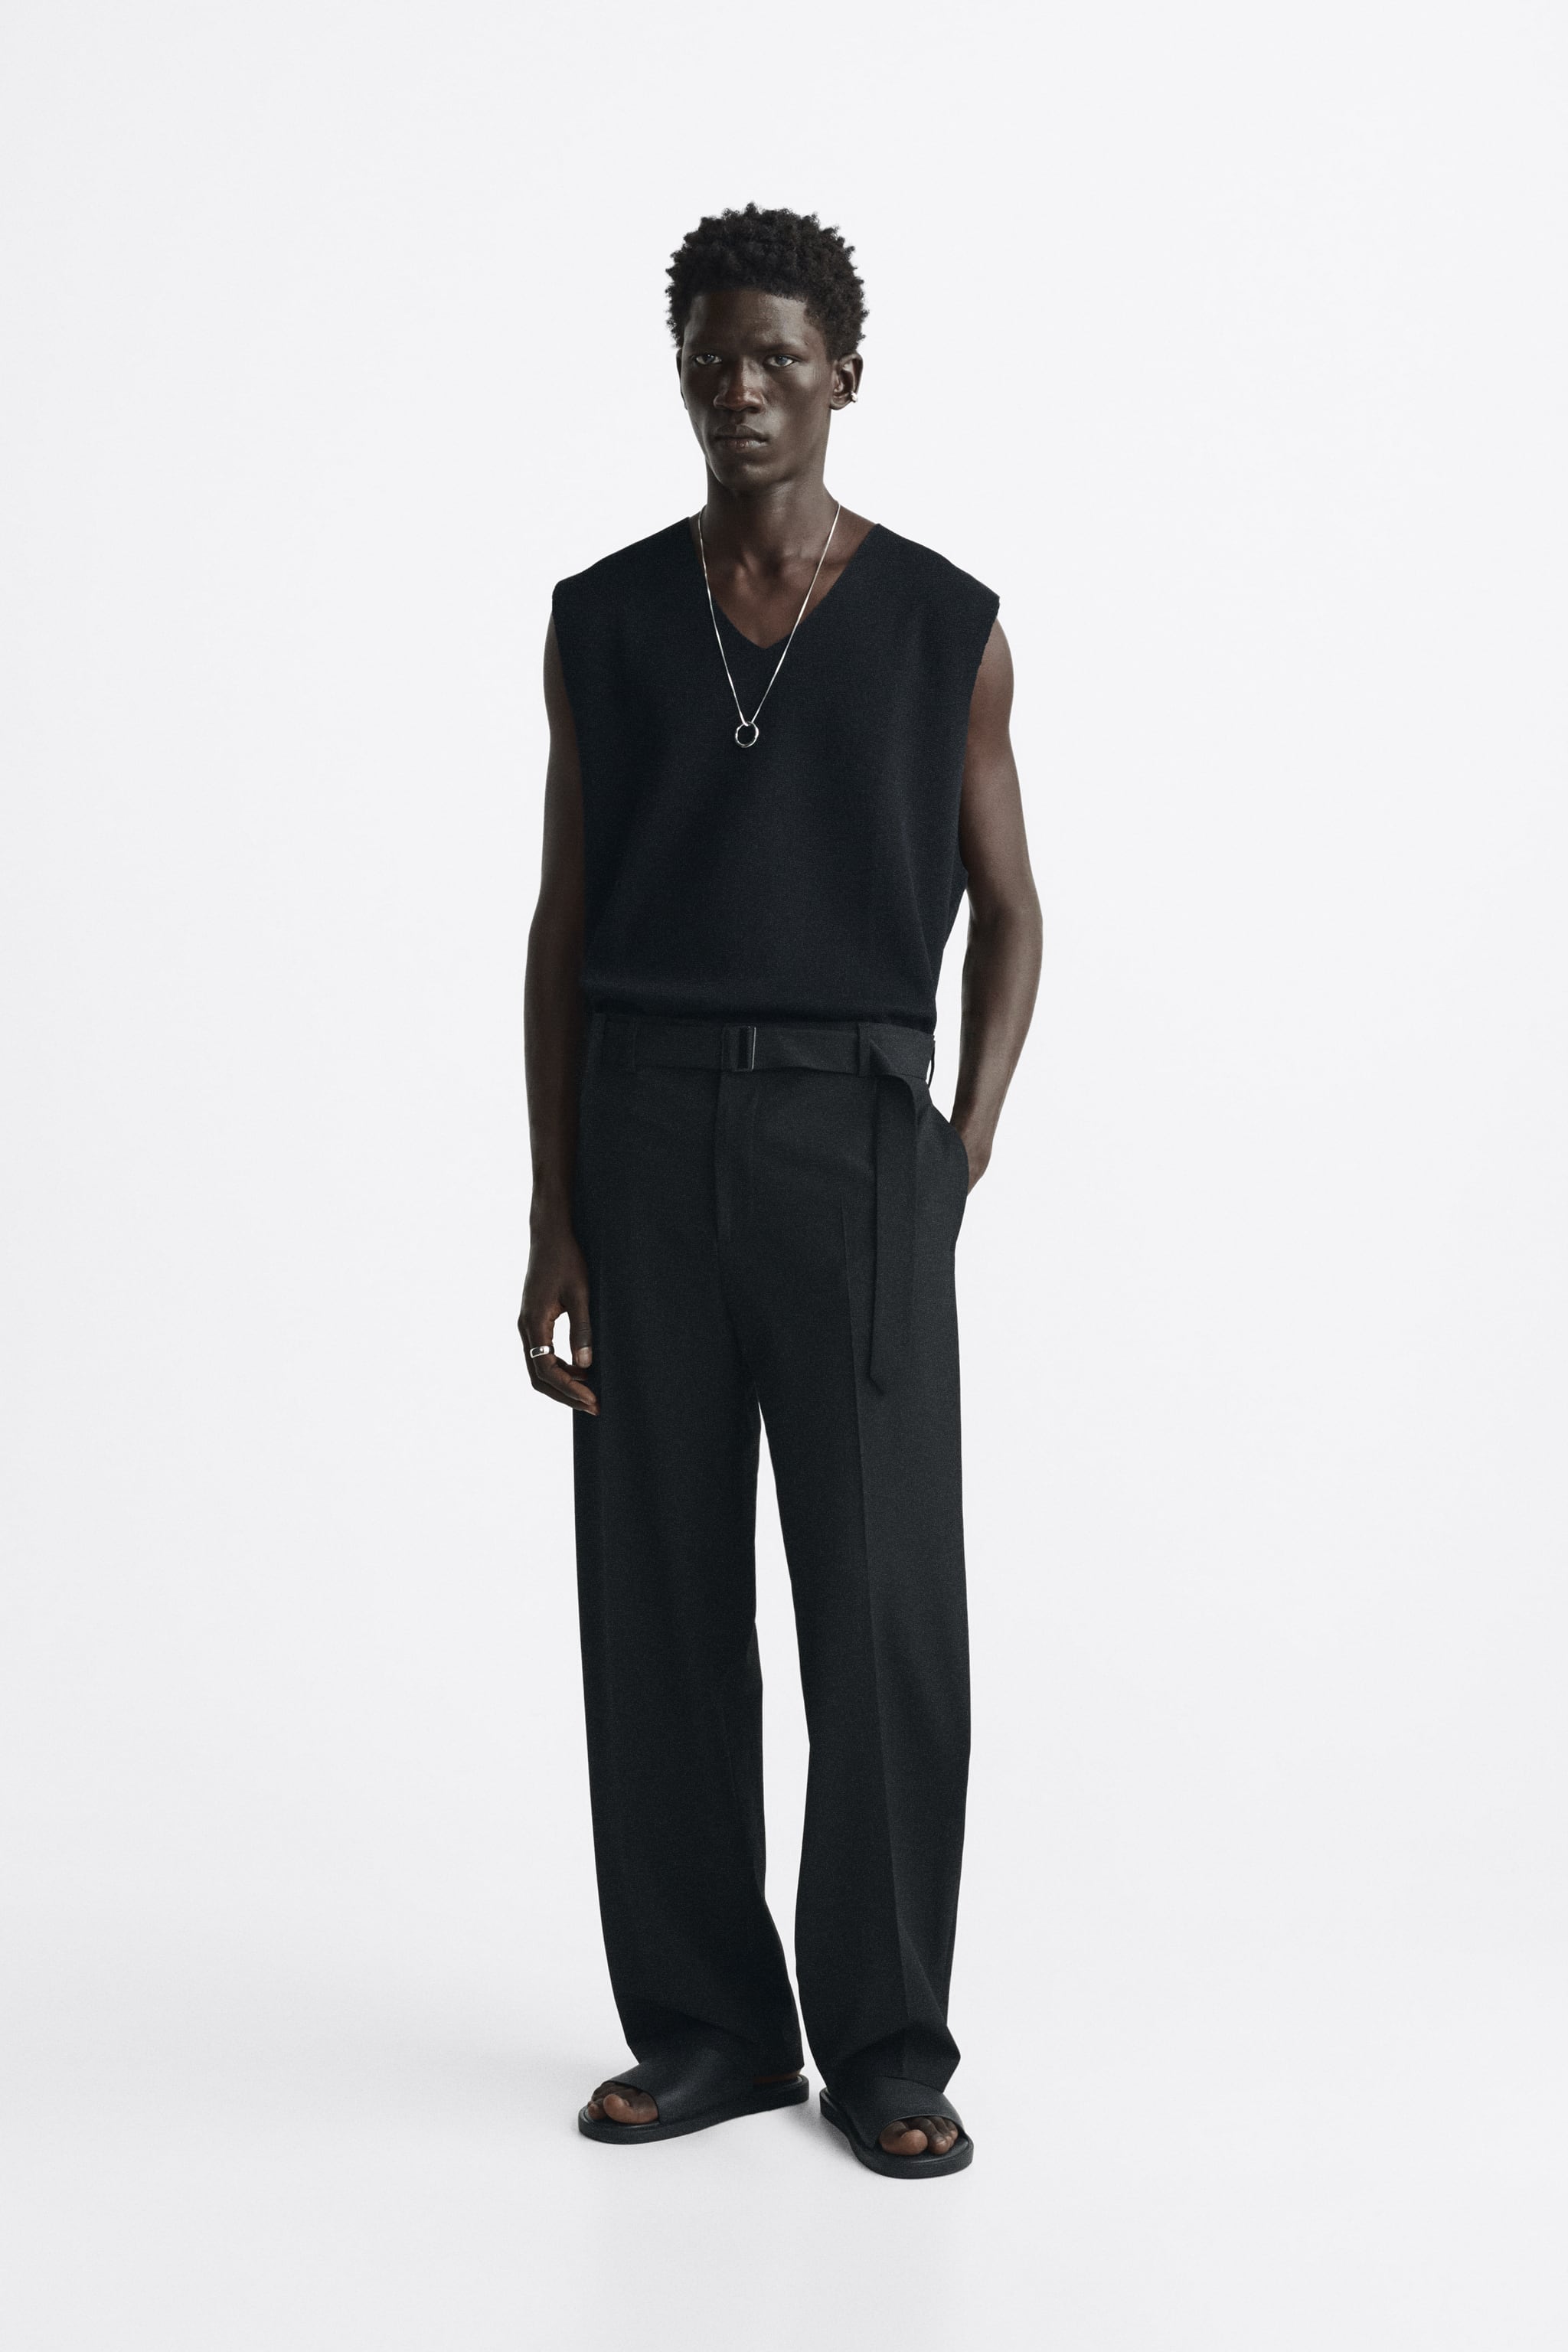 Zara LIMITED EDITION BELTED PANTS